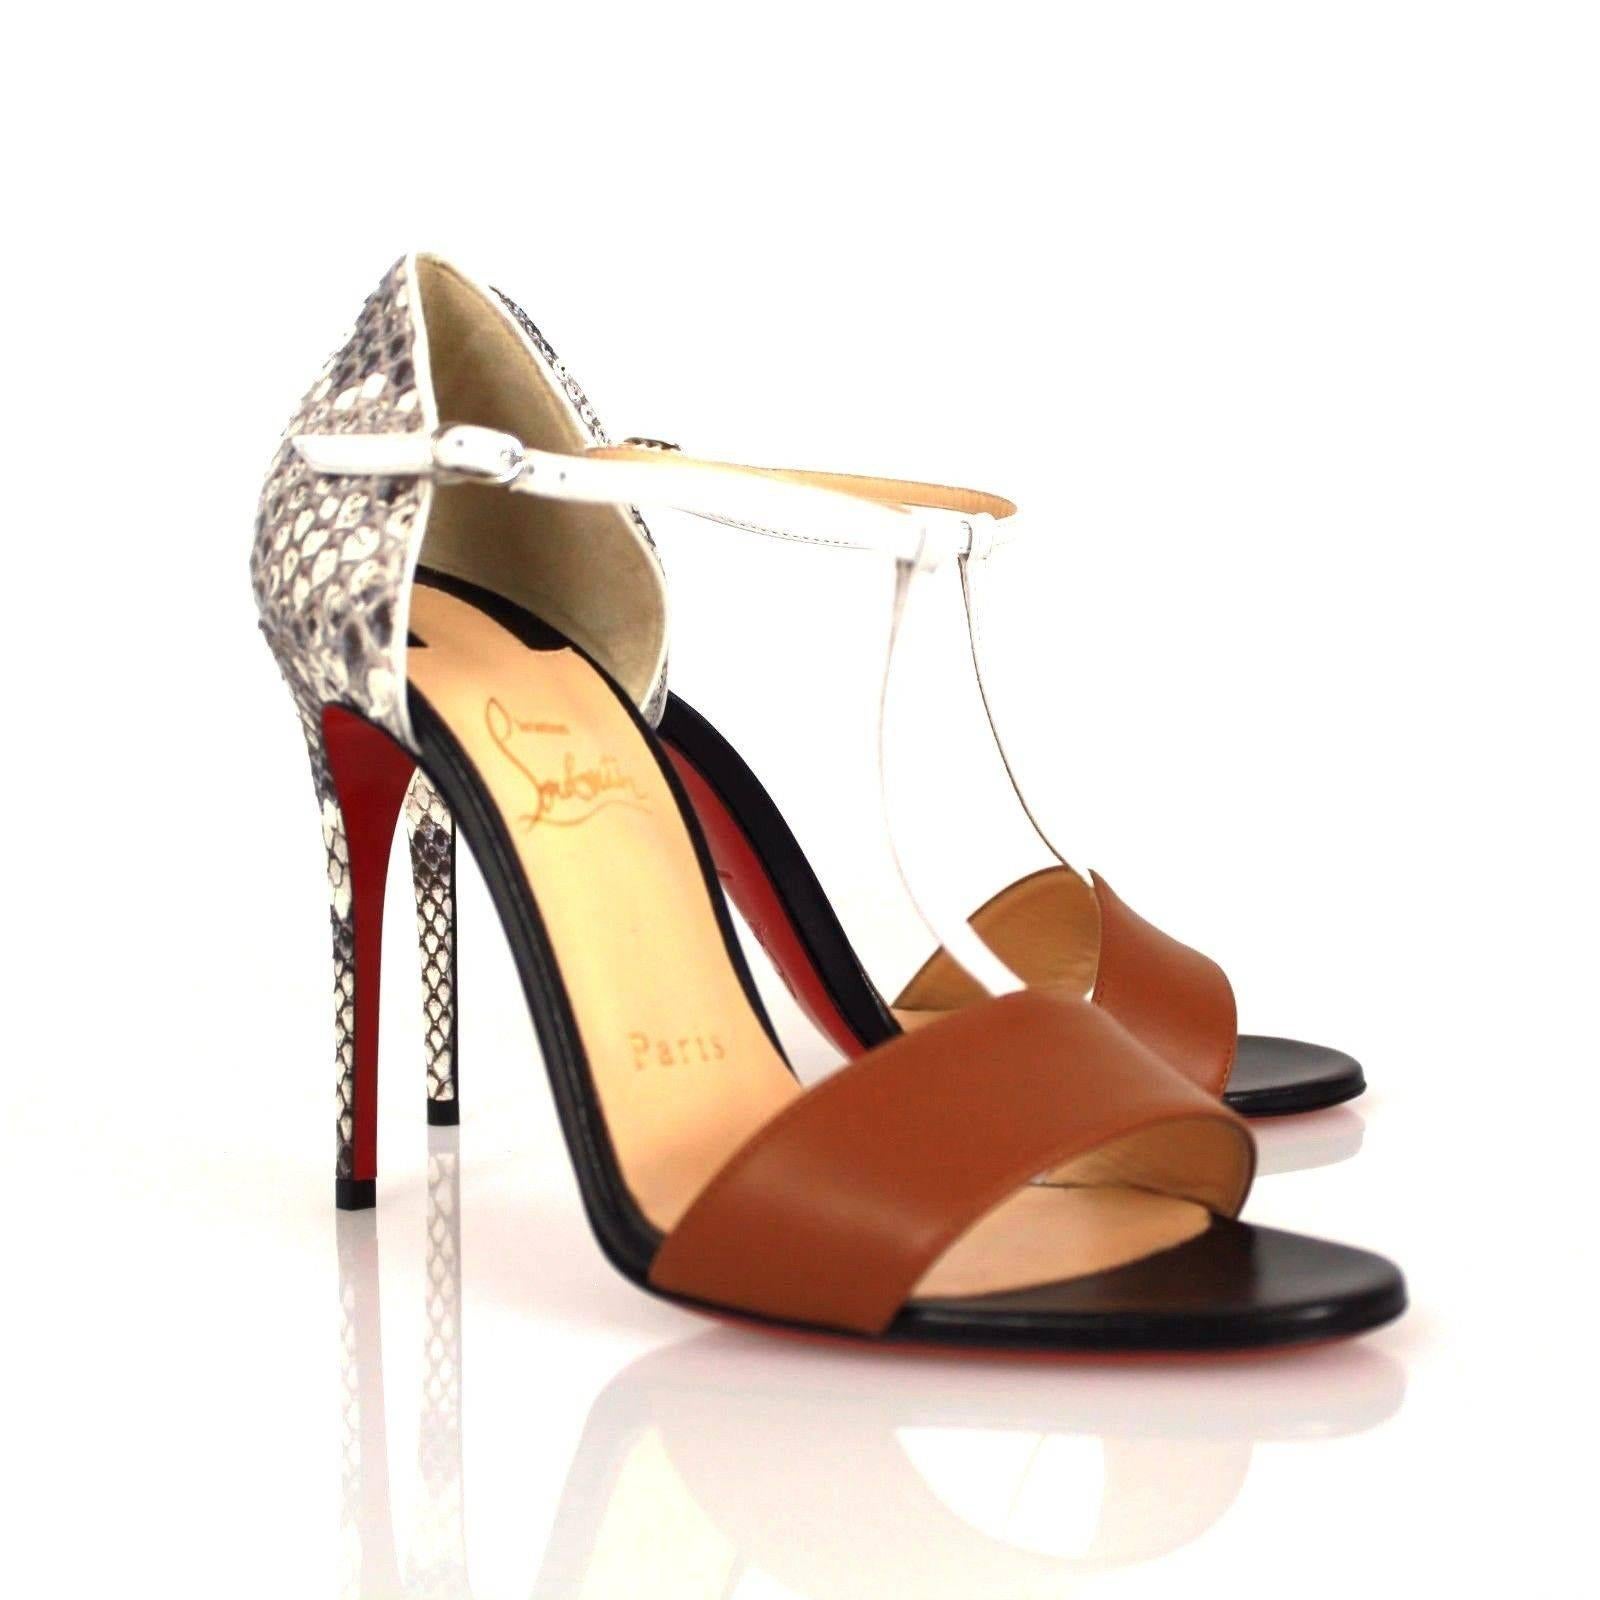 Christian Louboutin, most known for its gorgeous signature red sole. Presents and classy elegant sandal. Beautifully decorated with python on the heel with a bluish tint to it and neutralized with camel leather at the front. 

Conditions: Was once